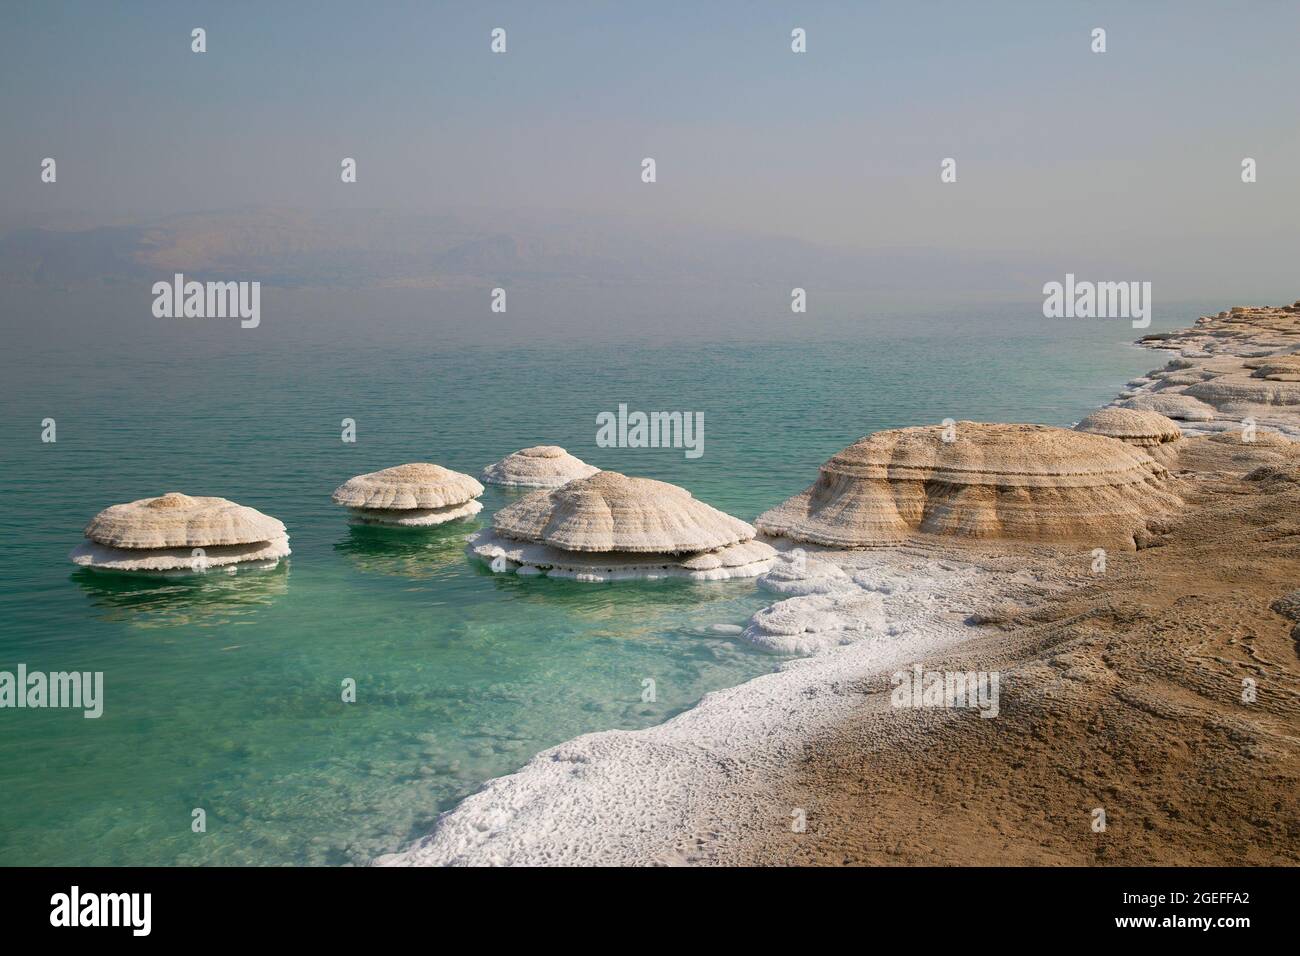 Salt chimneys on the Dead Sea coastline. They form where fresh water flows into the saline lake water and are exposed as water levels drop. Stock Photo